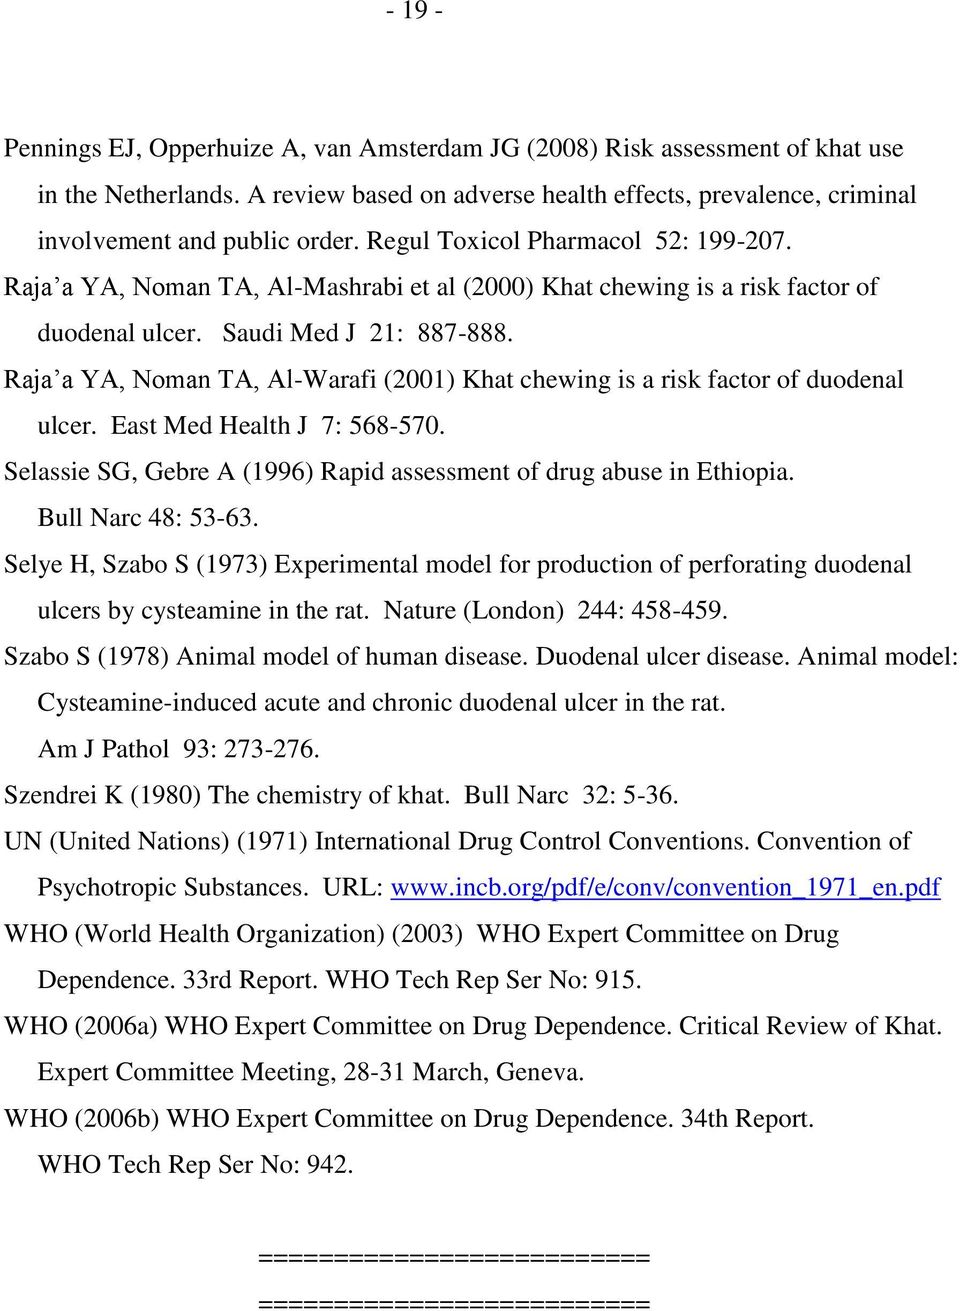 Raja a YA, Noman TA, Al-Warafi (2001) Khat chewing is a risk factor of duodenal ulcer. East Med Health J 7: 568-570. Selassie SG, Gebre A (1996) Rapid assessment of drug abuse in Ethiopia.